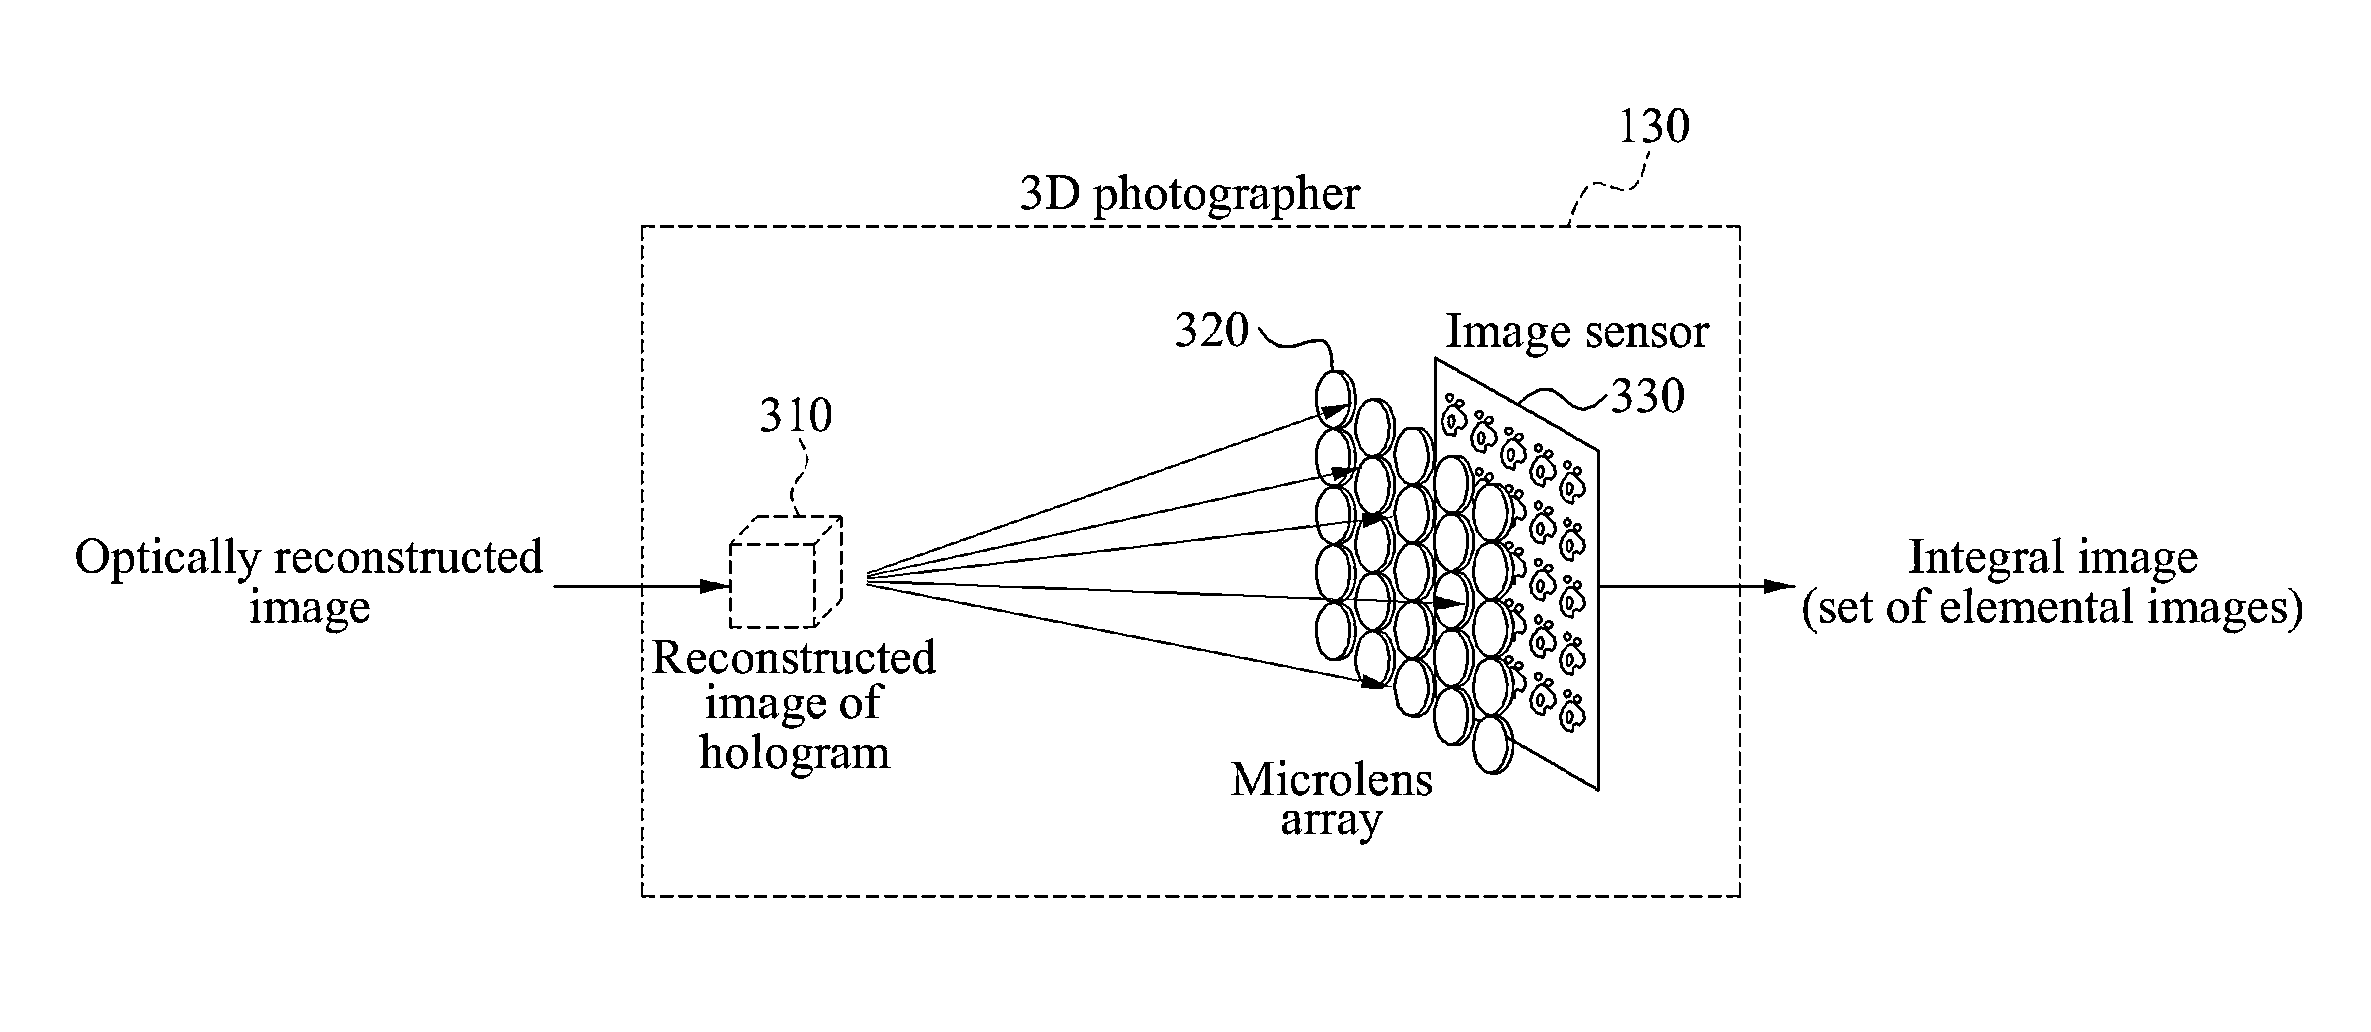 Apparatus and method for measuring and evaluating field of view (FOV) of reconstructed image of hologram